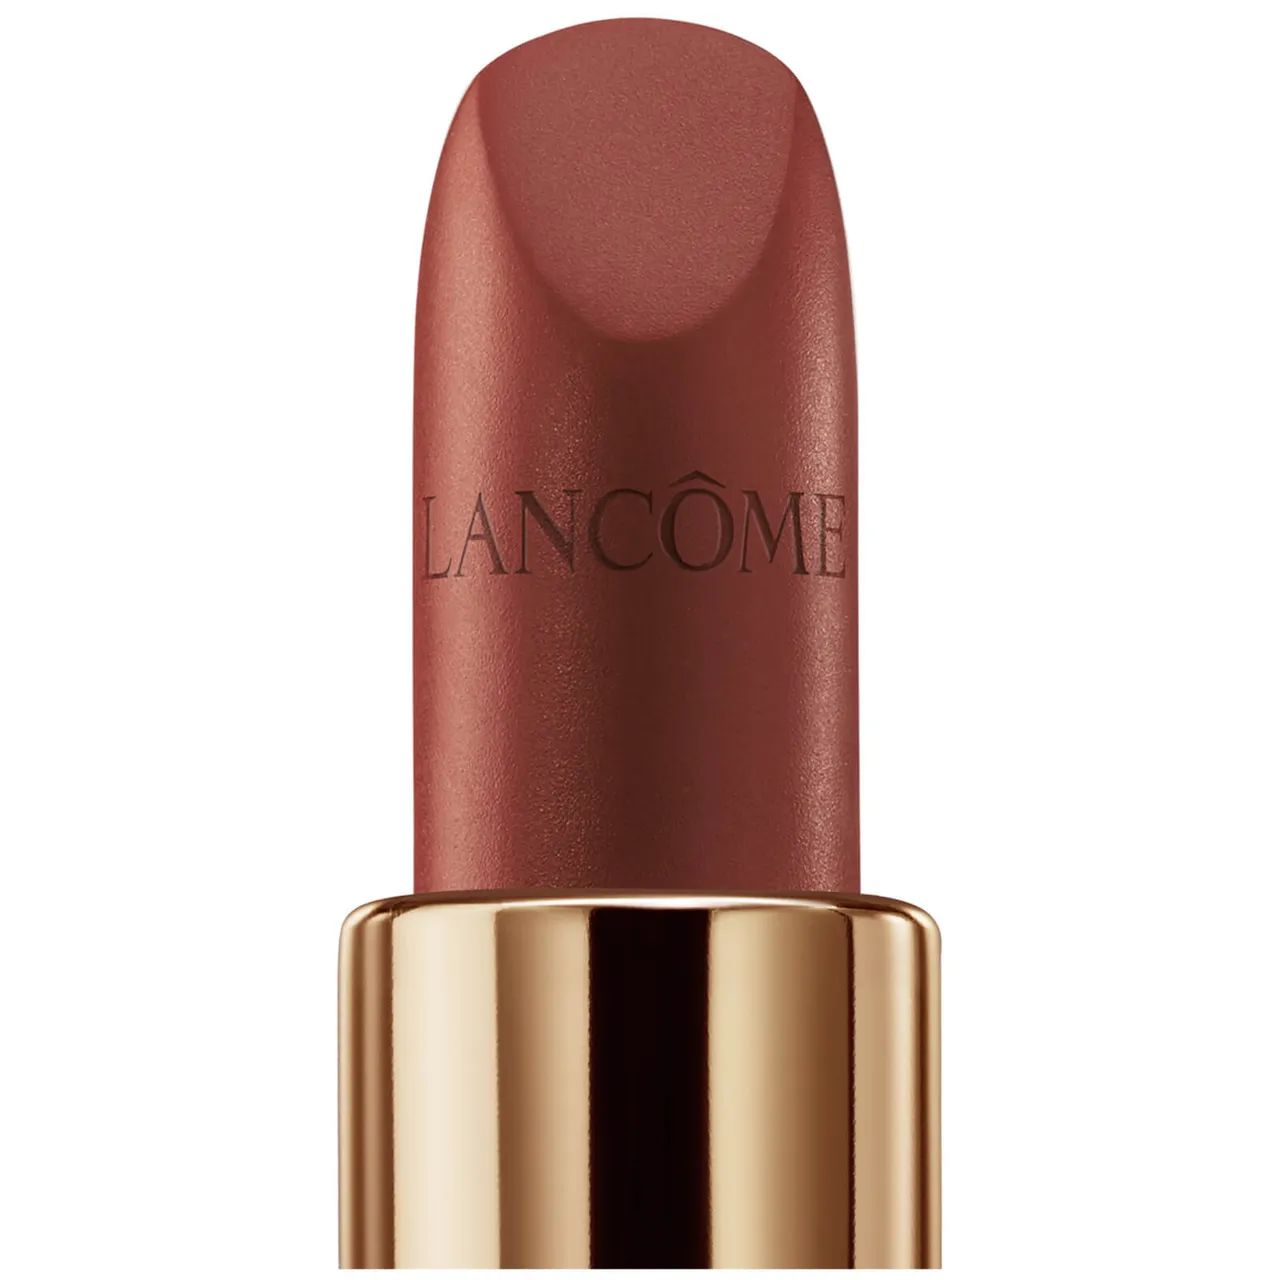 Lancôme L'Absolu Rouge Intimatte Lipstick 3.4ml (Various Shades) - 299 French Cashmere